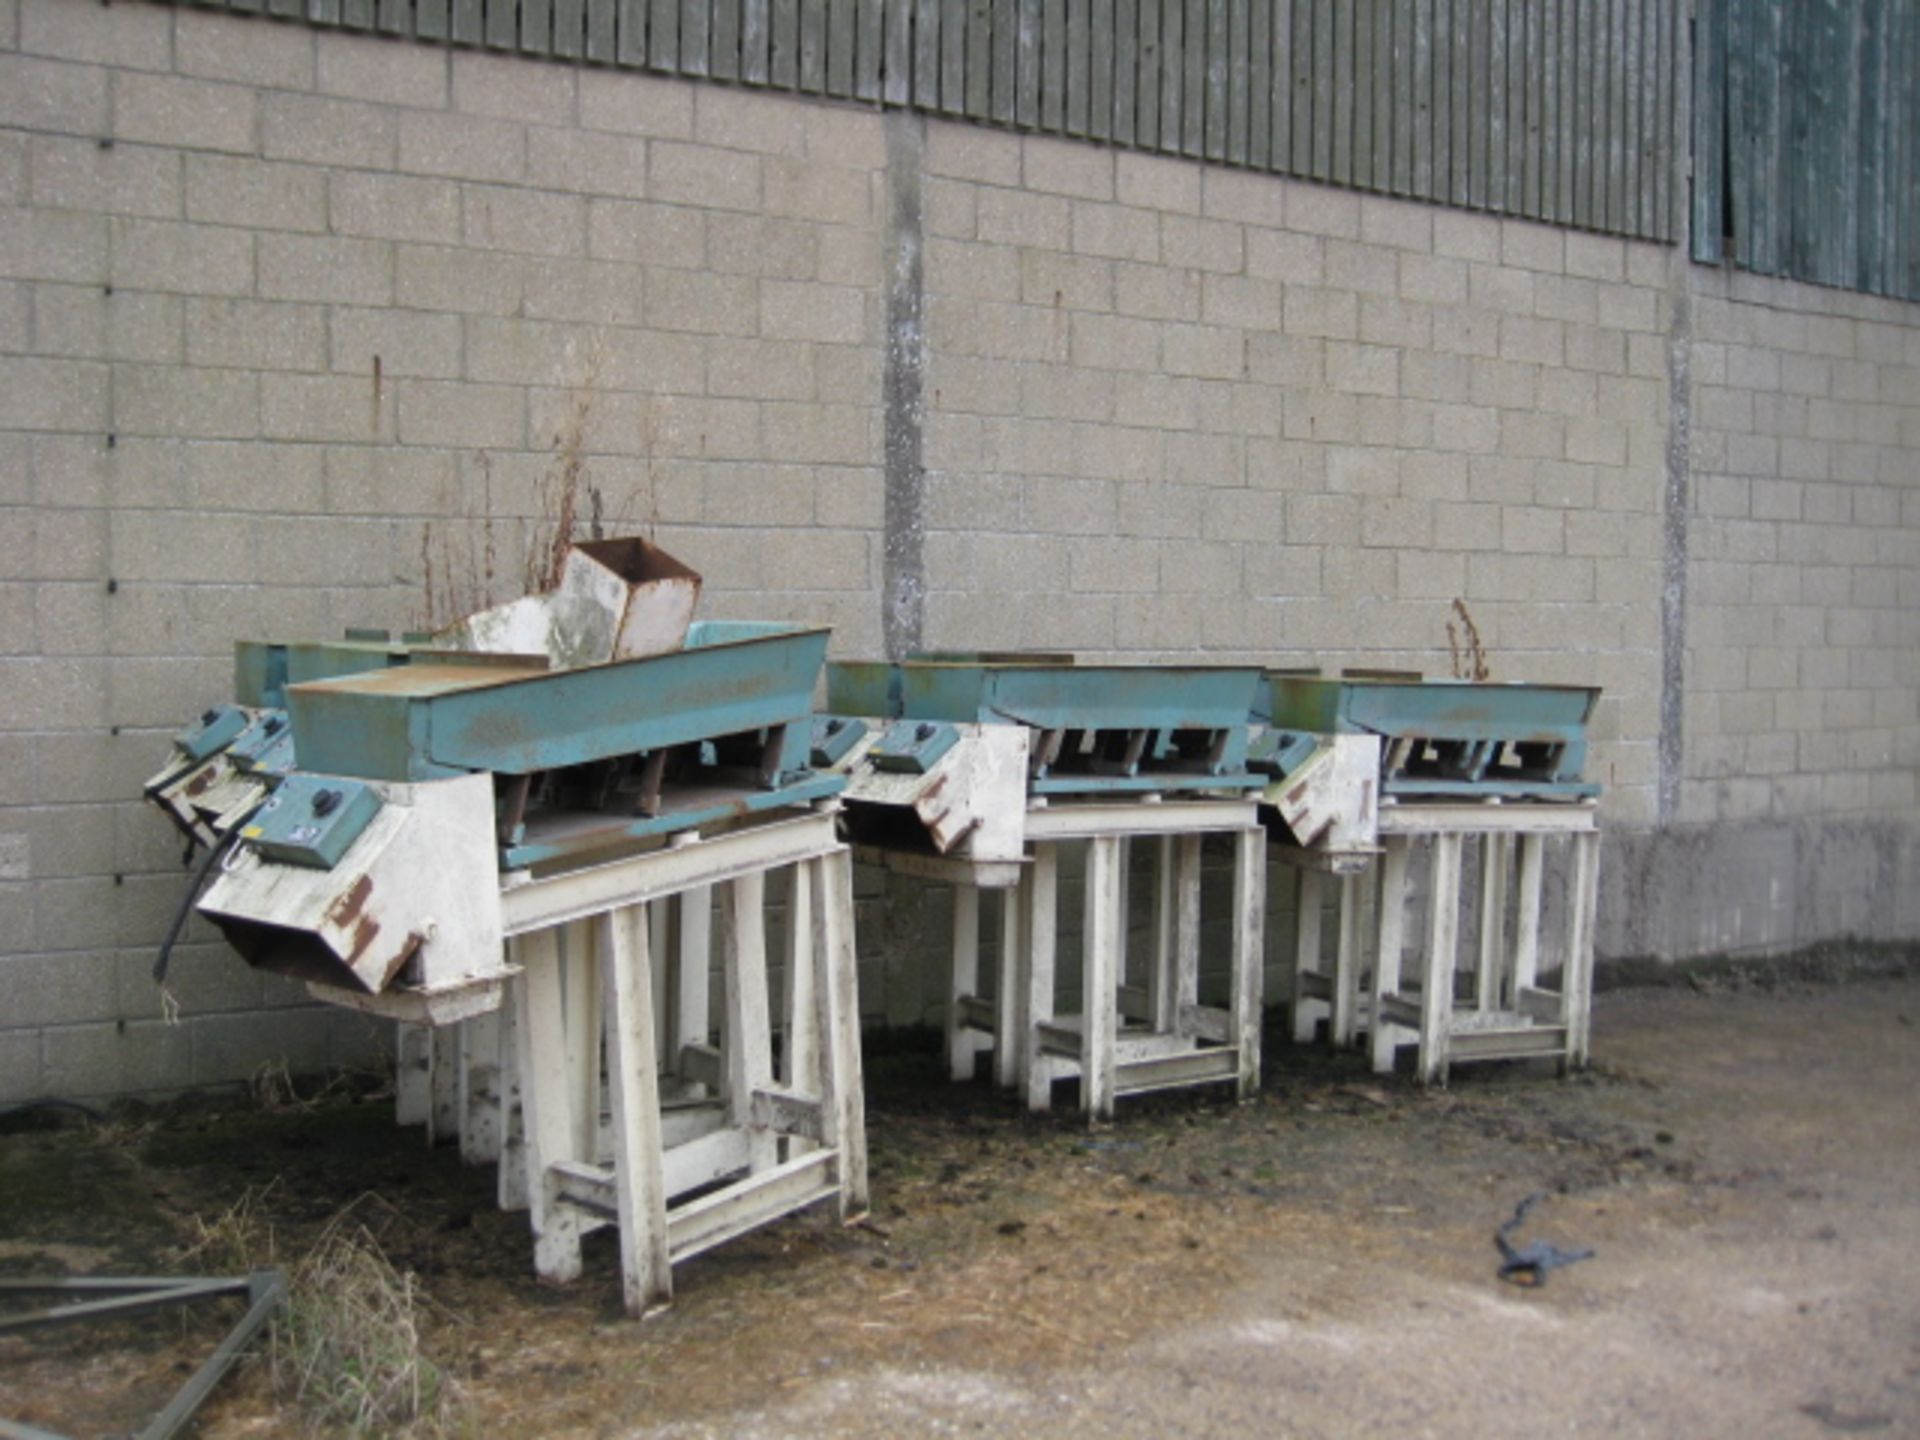 Tray Feeder - Steel hopper 1.8M x 1.8M x 4.0M high overall with supporting legs and board top. The - Bild 4 aus 6